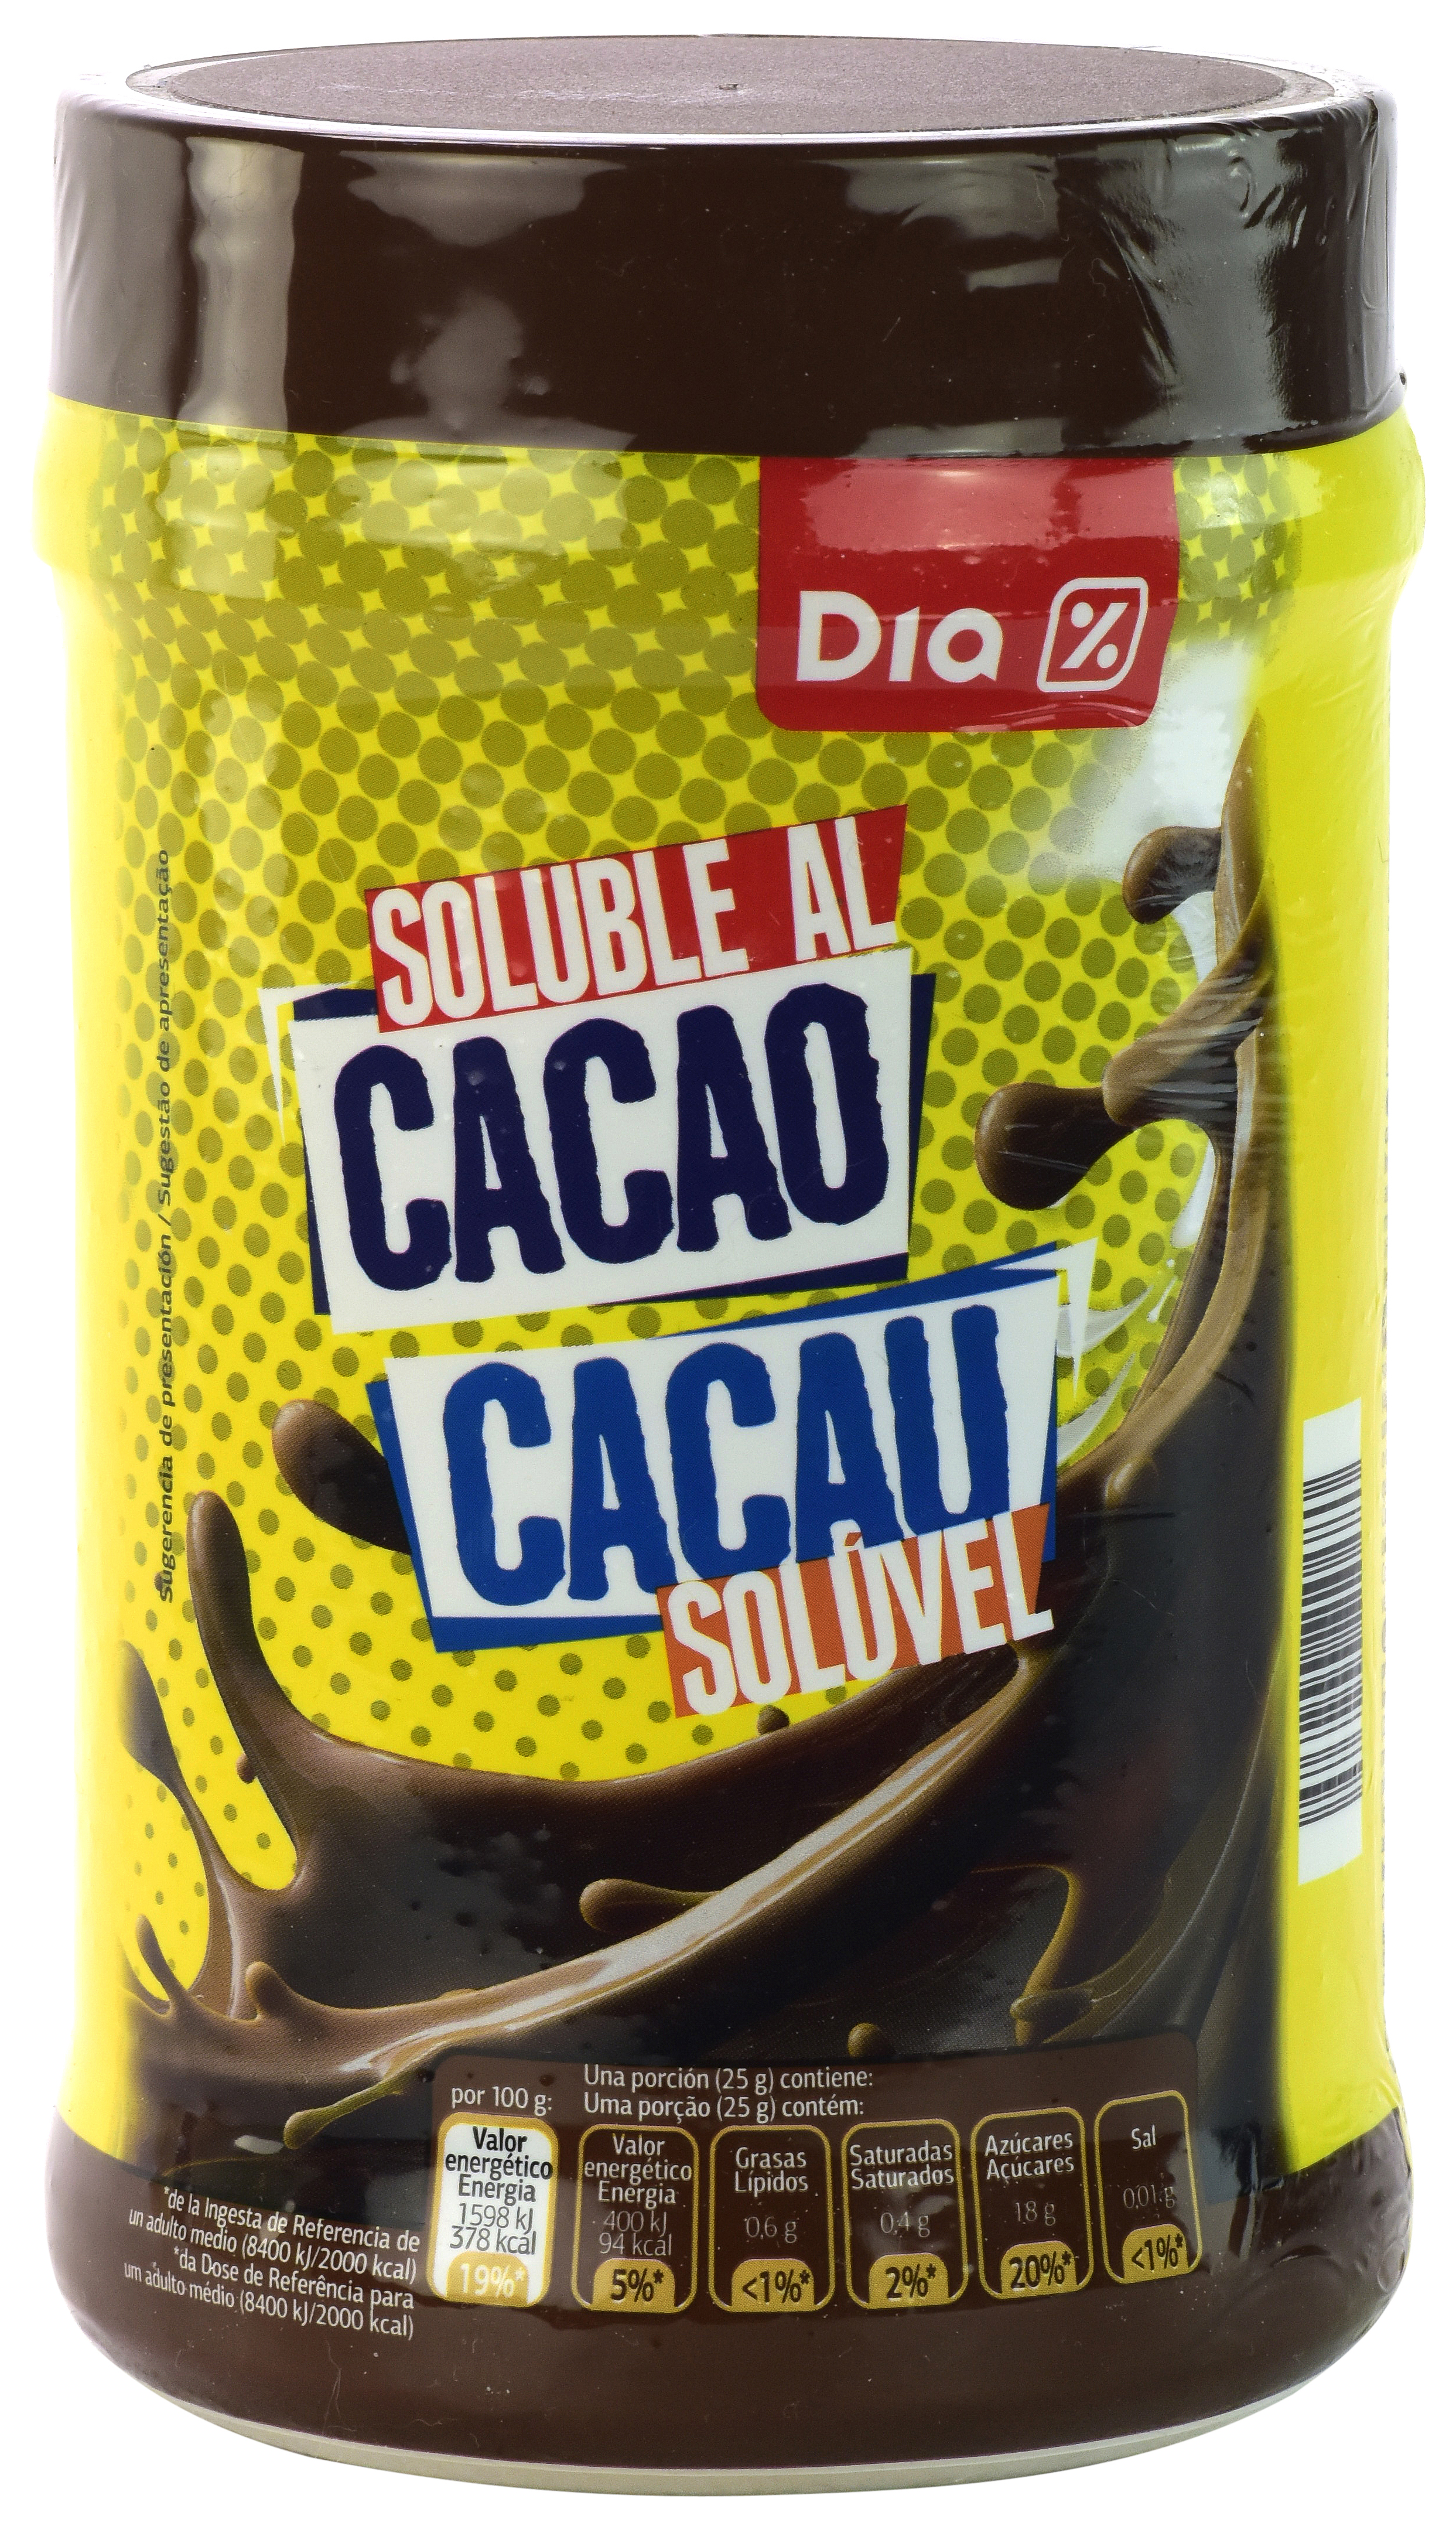 SOLUBLE AL CACAO